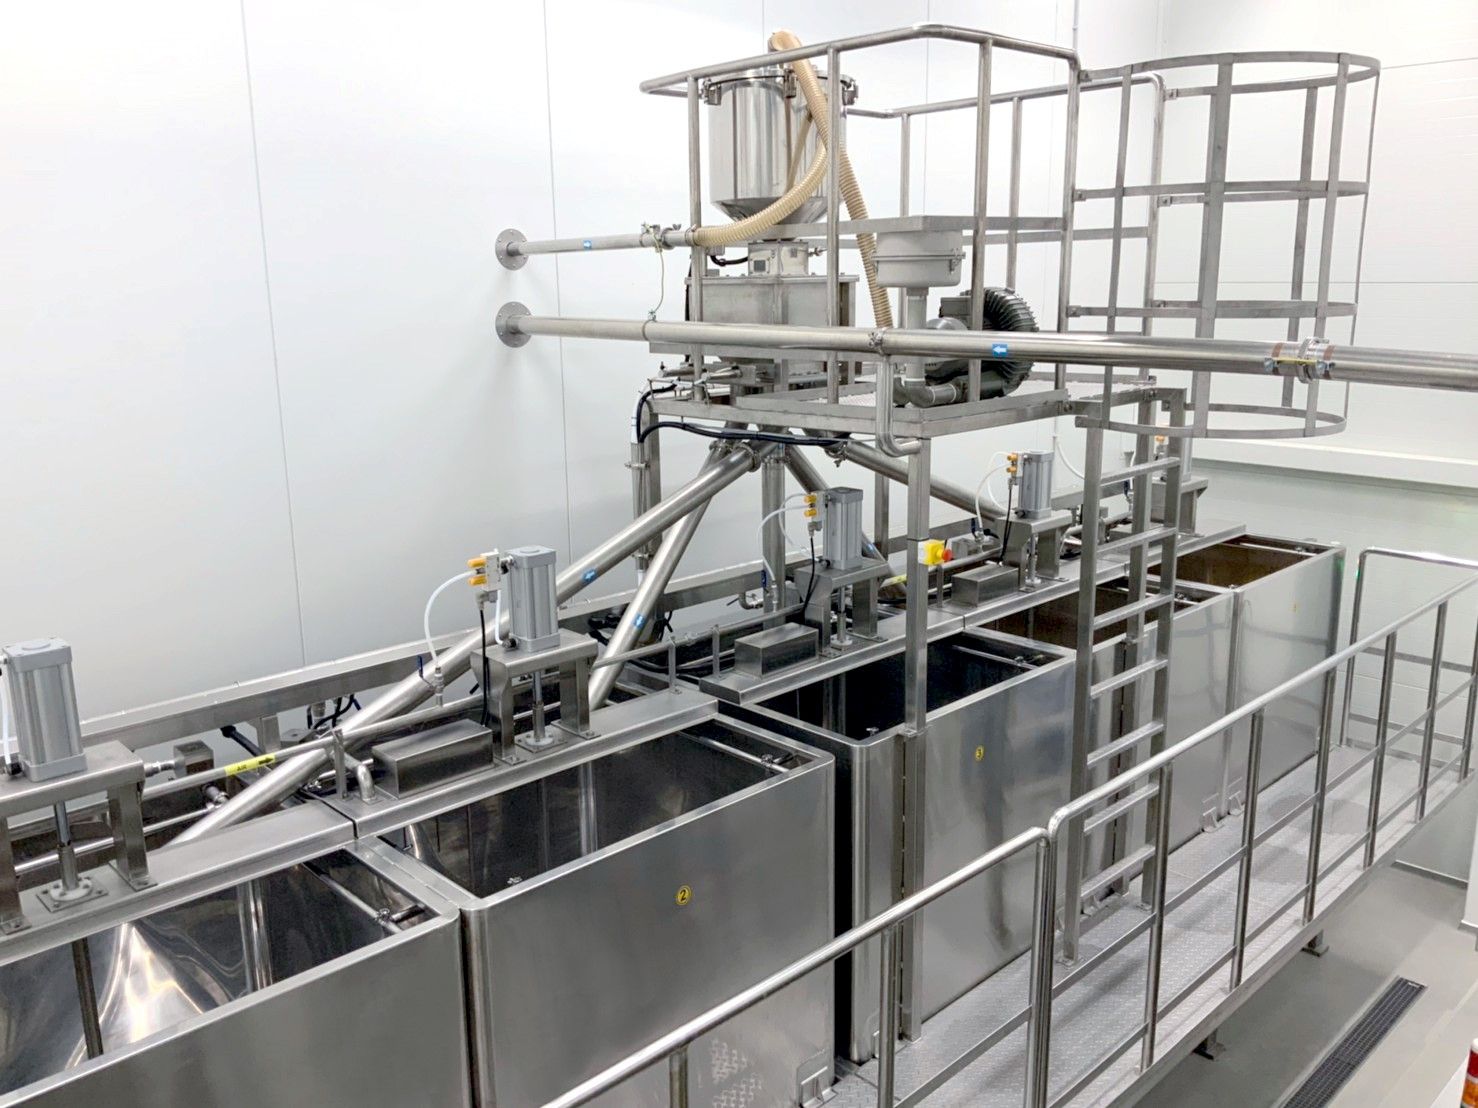 Auto control the soaking time to ensure bean soaking quality and stable on bean soaking ratio, to ensure we can get stable soymilk extracting yield during extraction process.